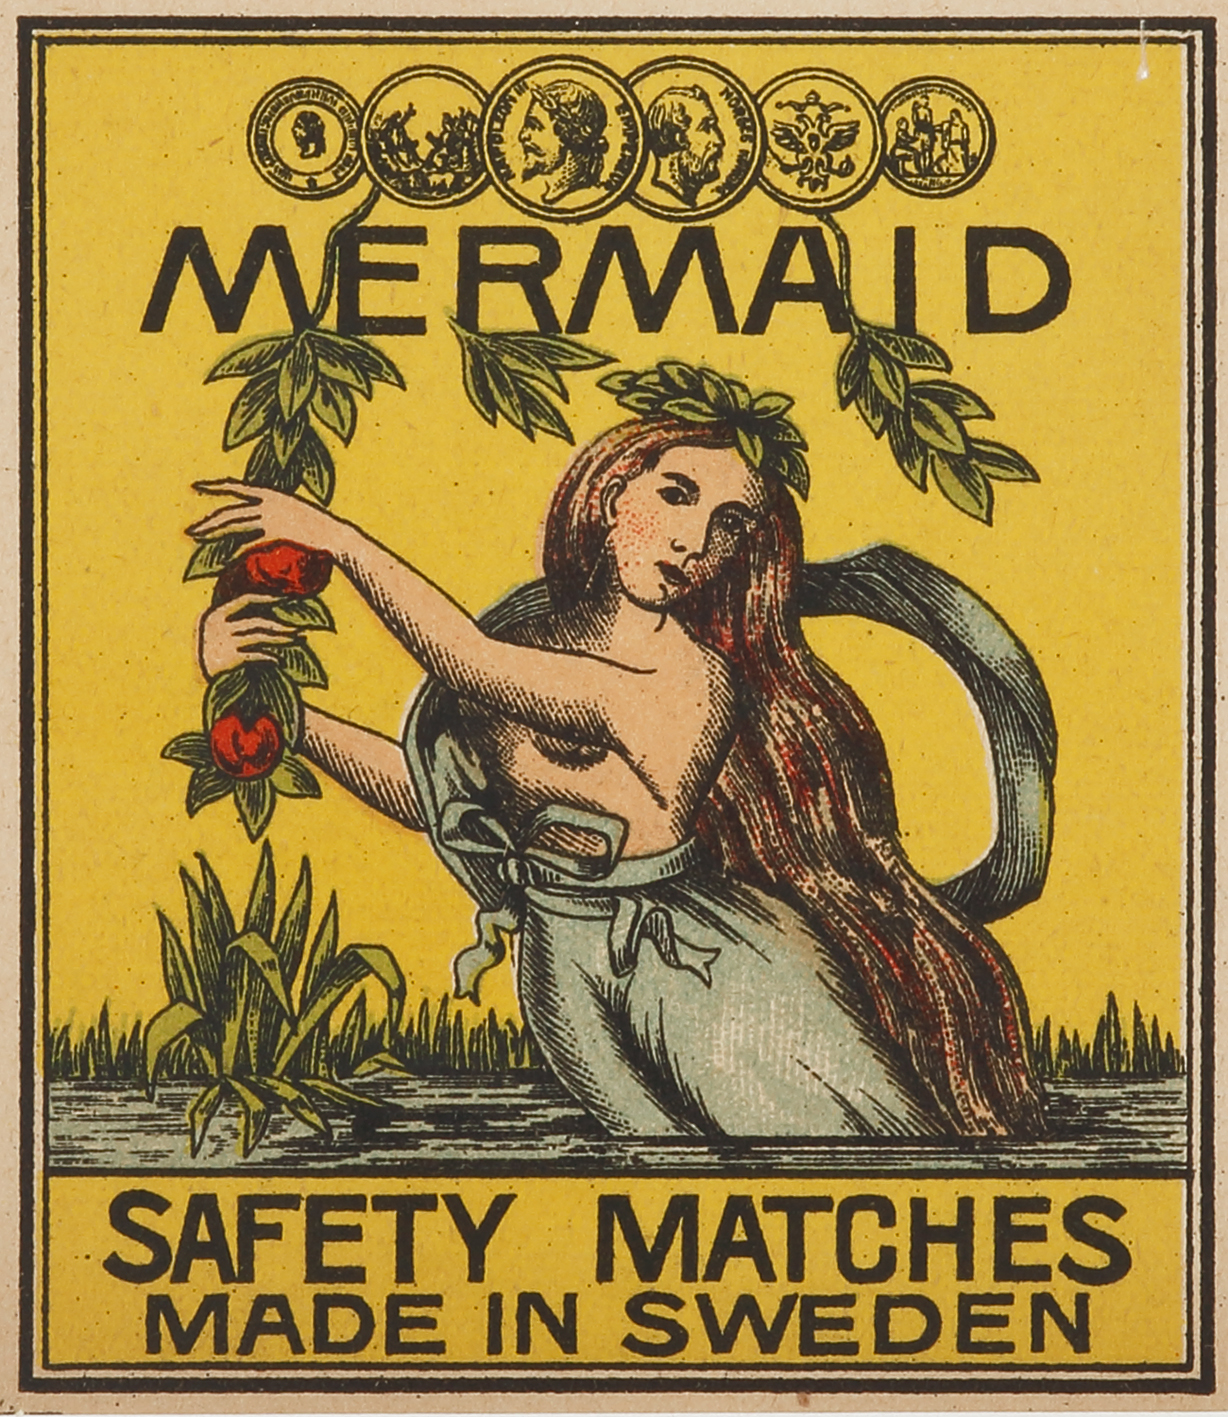 Mermaid - Antique Print from 1910